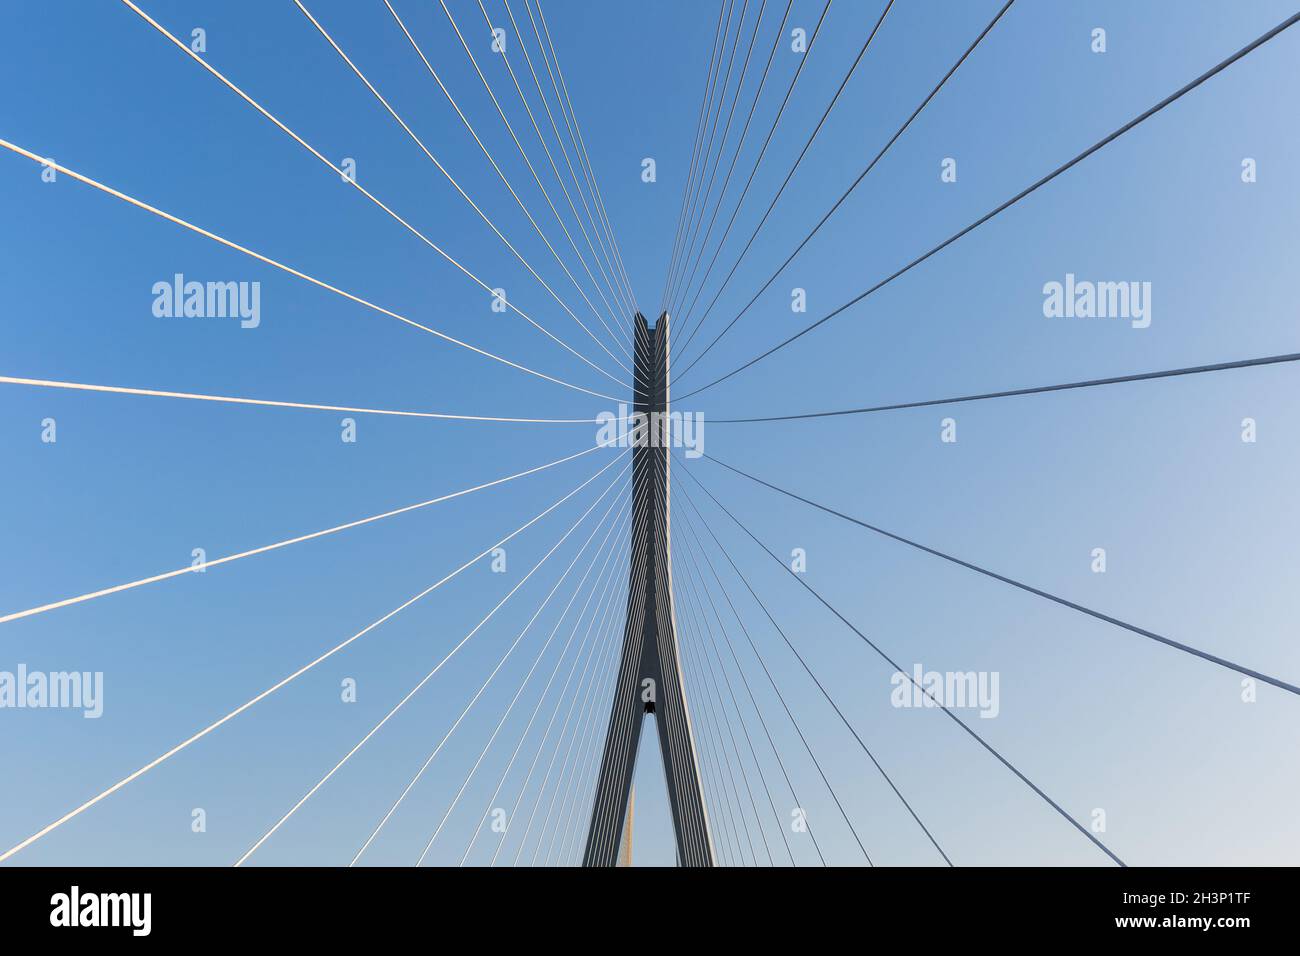 Bridge tower with stay cables closeup Stock Photo